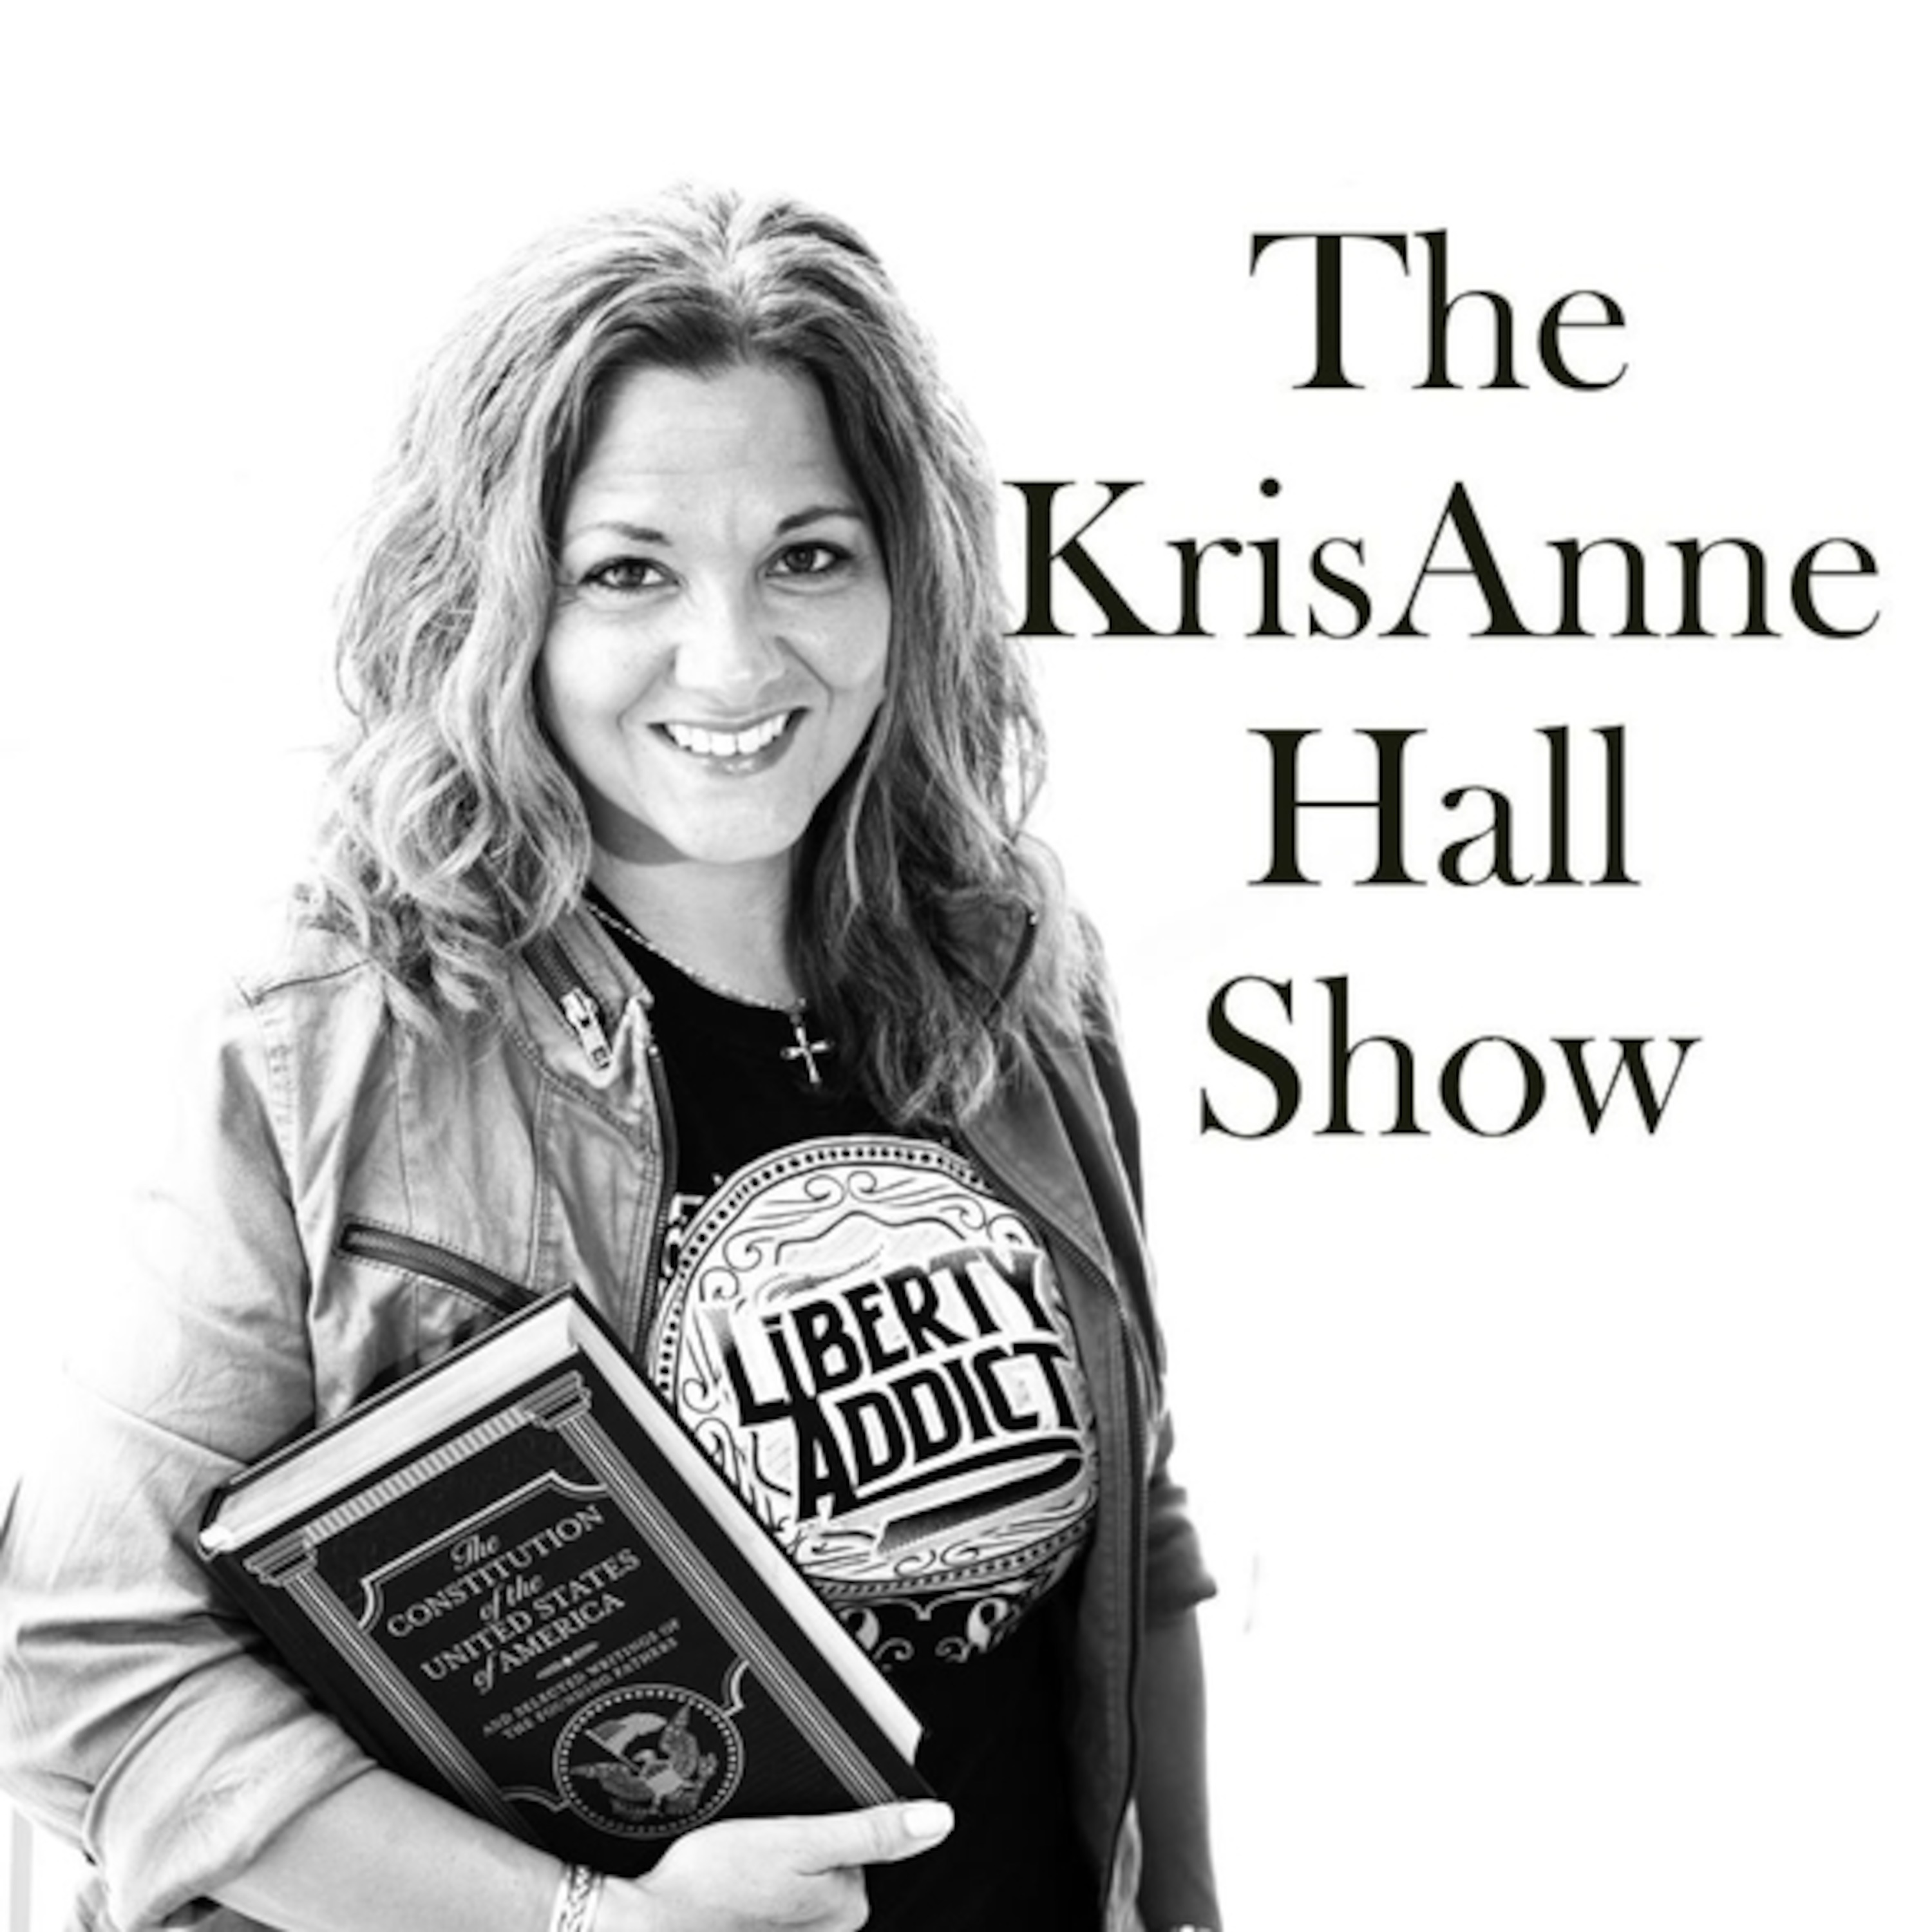 The KrisAnne Hall Show - Its Moving Day!